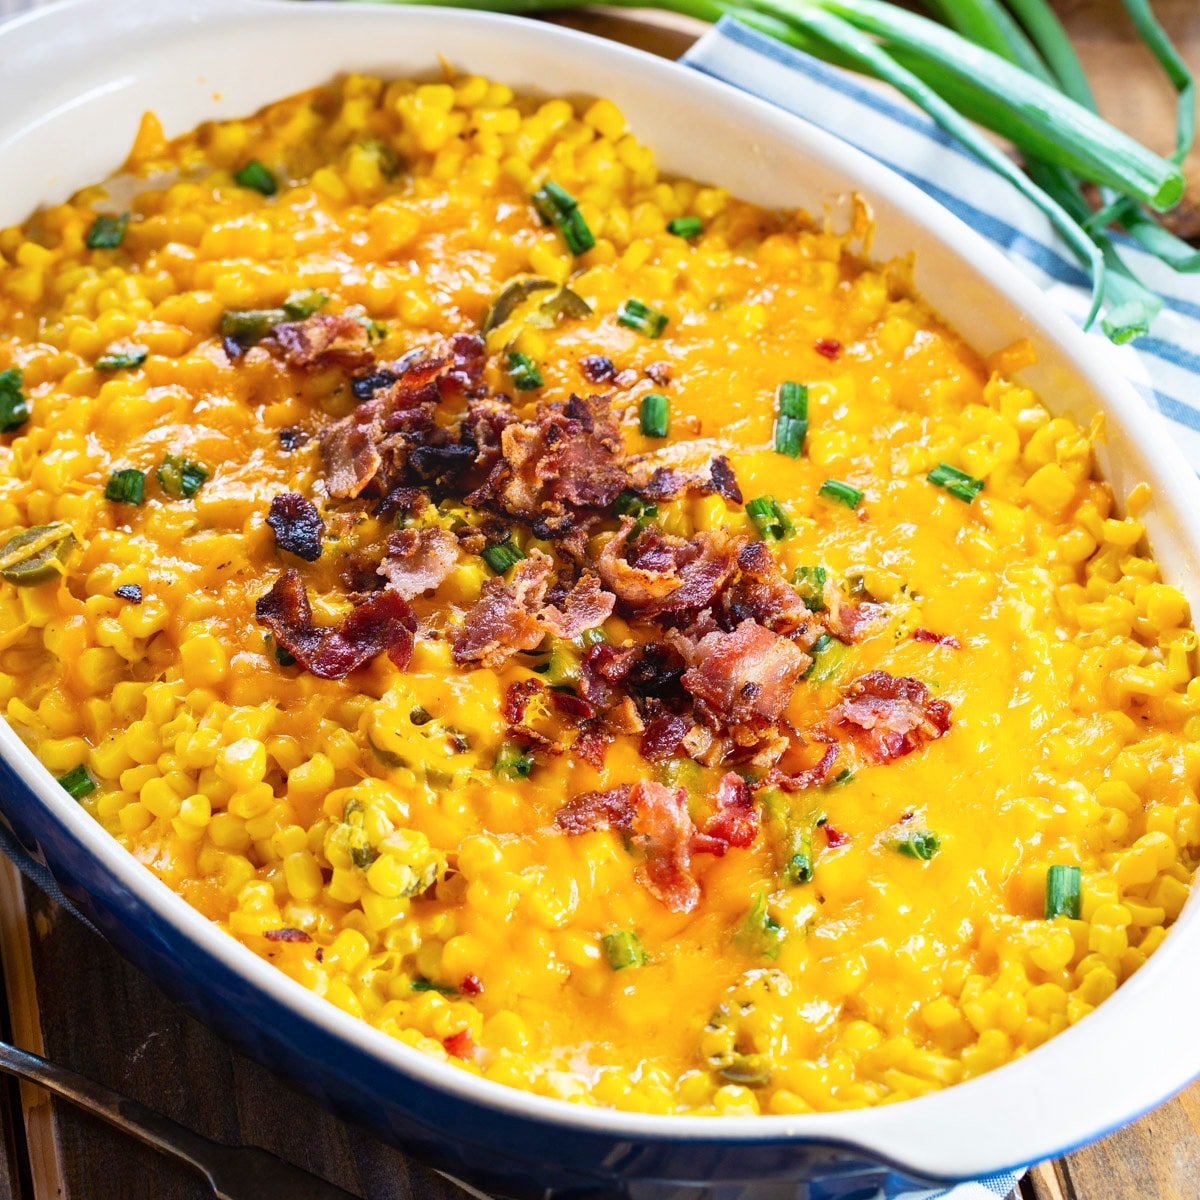 Cheddar Corn Casserole topped with bacon in casserole dish.